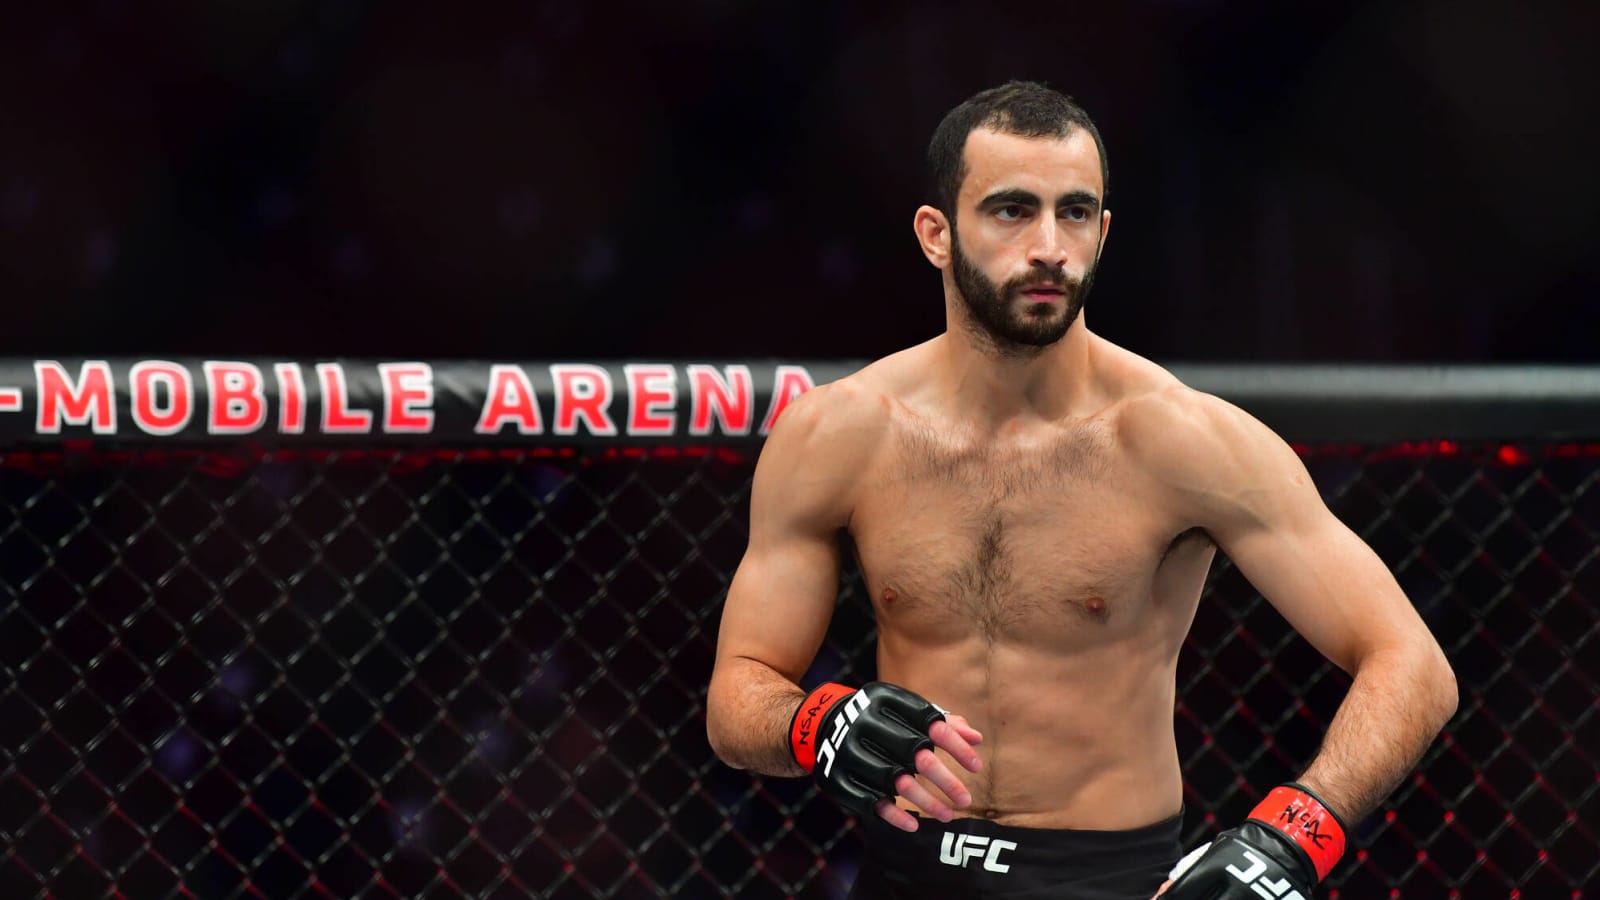 After big win at UFC Singapore, what’s next for Giga Chikadze?